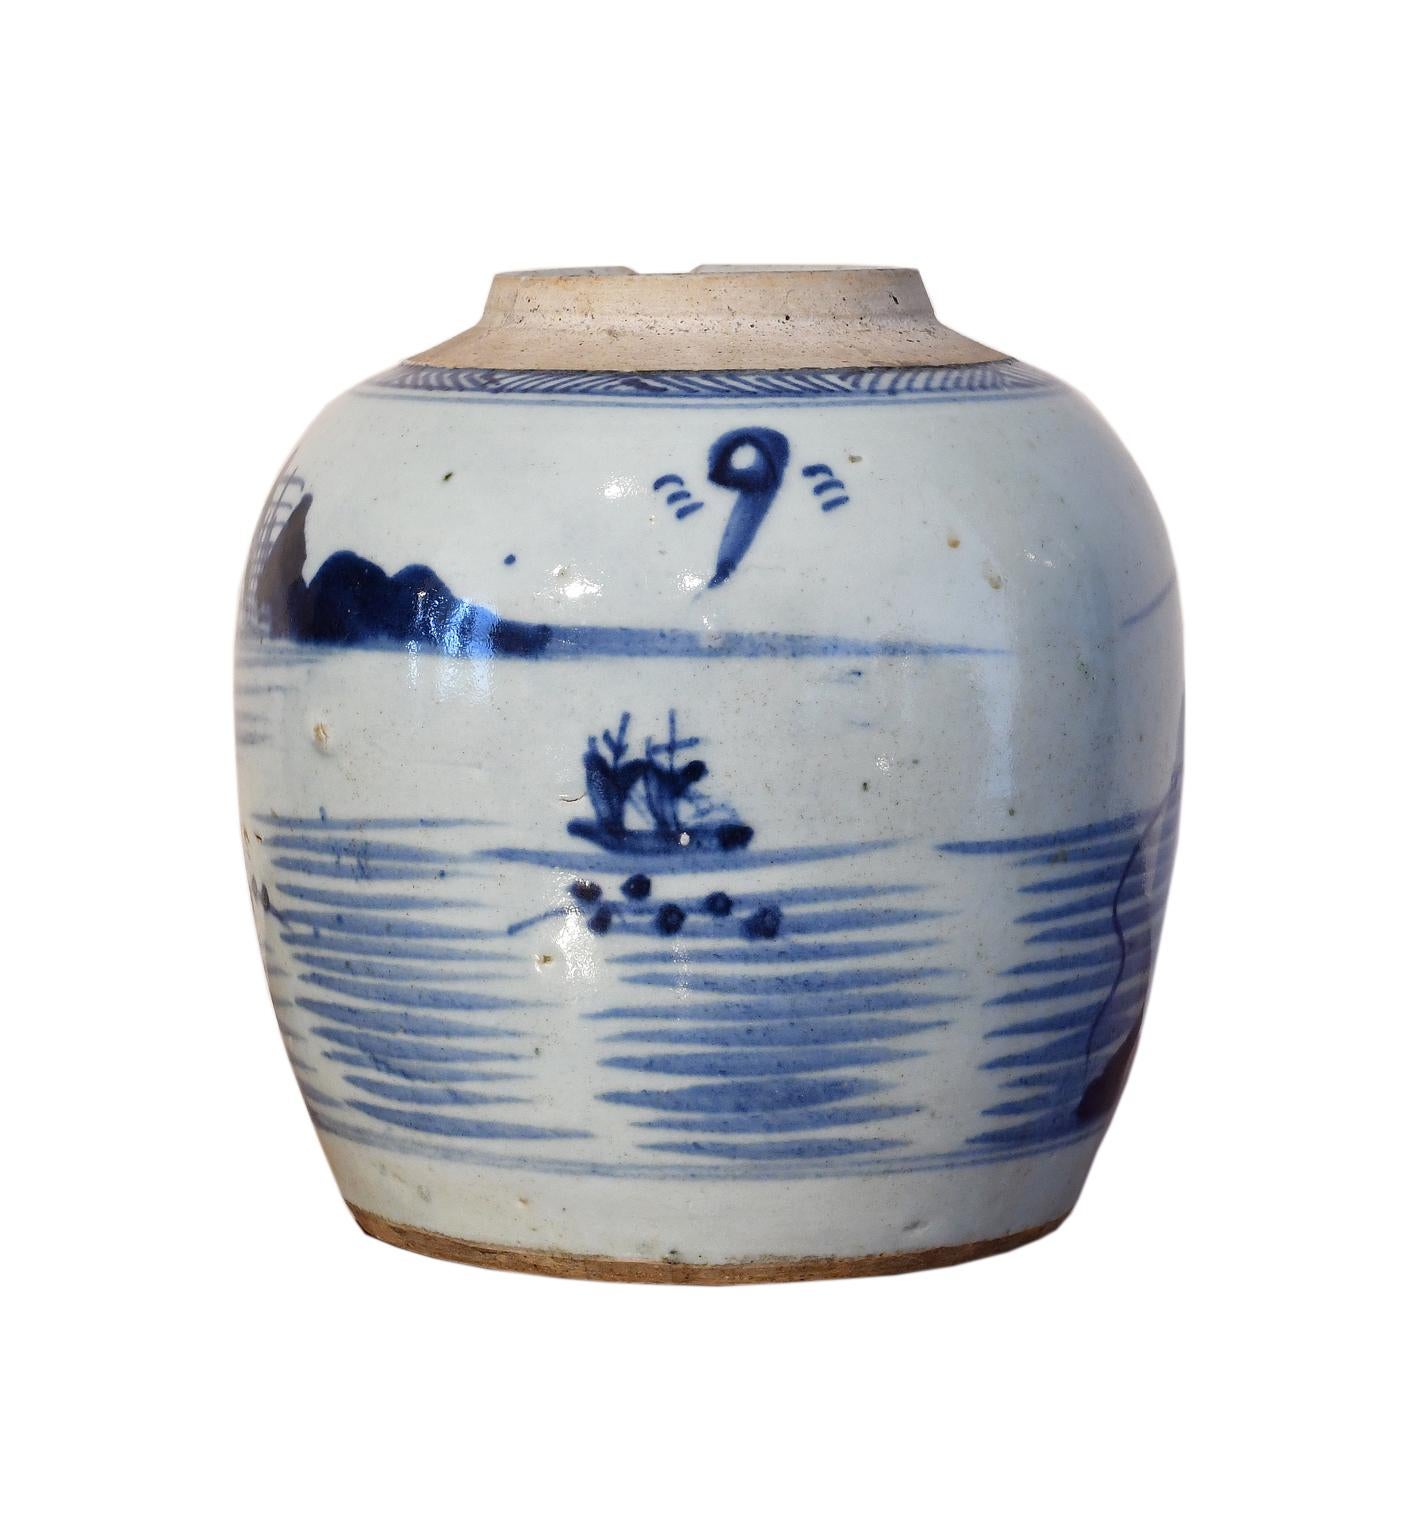 A charming Chinese porcelain jar with hand-painted landscape and river scenes in cobalt blue depicting a pagoda-like lighthouse in the foreground, and possibly the Yangshuo Mountains in the distance. Another scene shows a double-masted sailboat